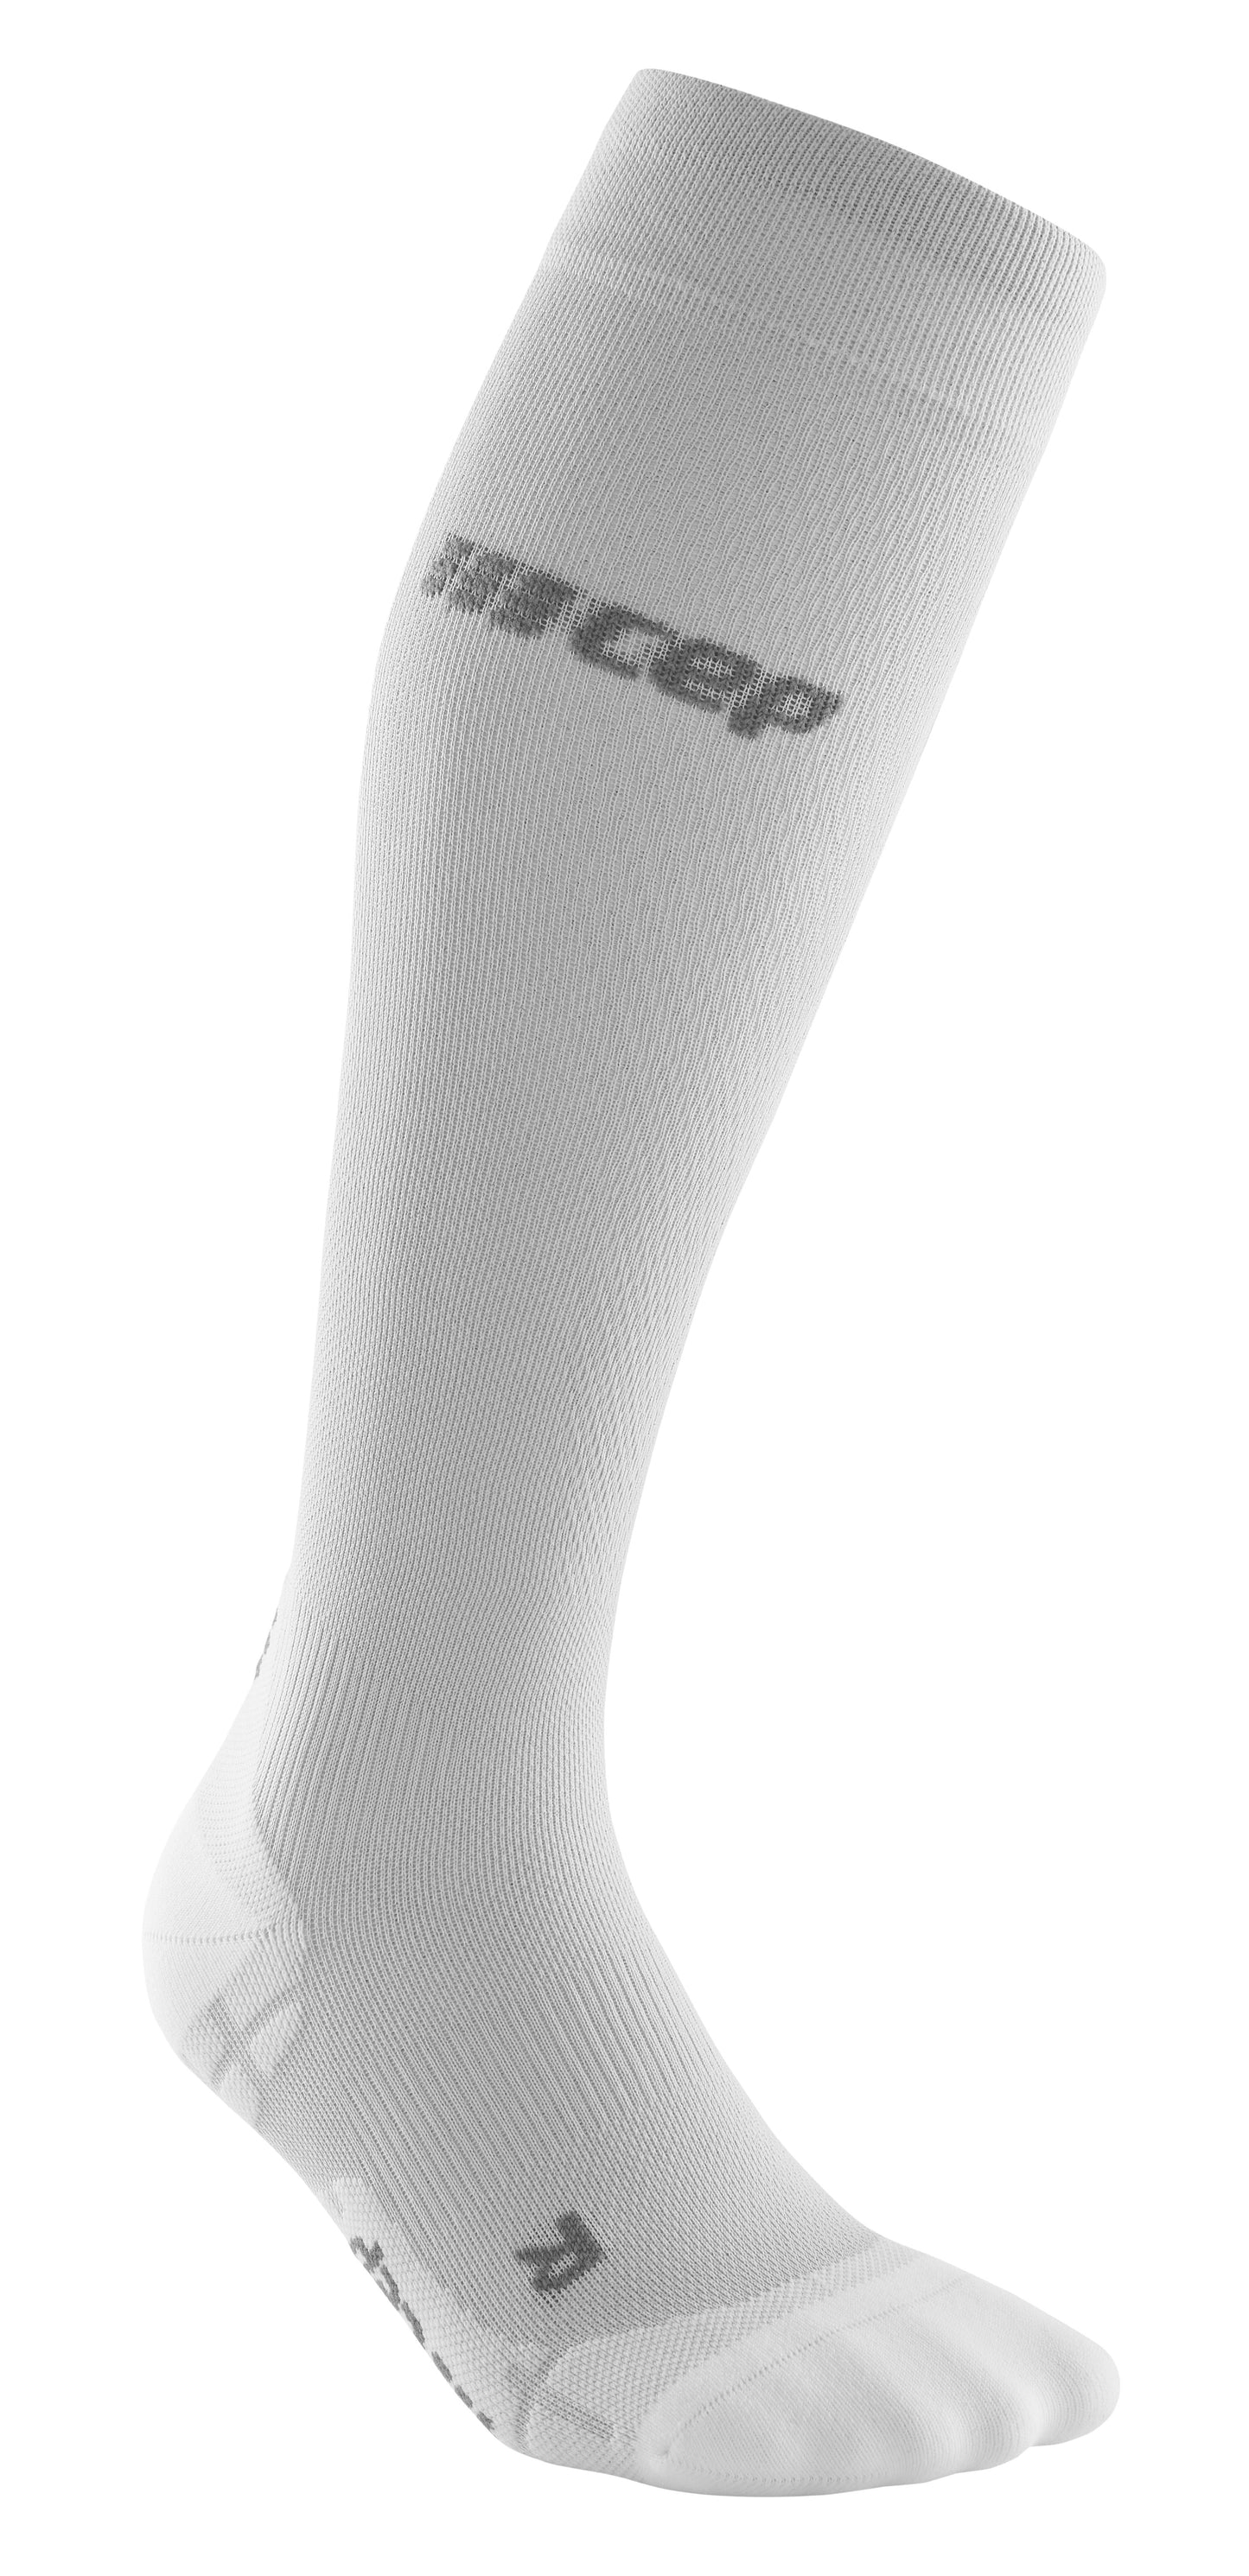 CEP Ultralight Compression Sock Tall Men's - Carbon White